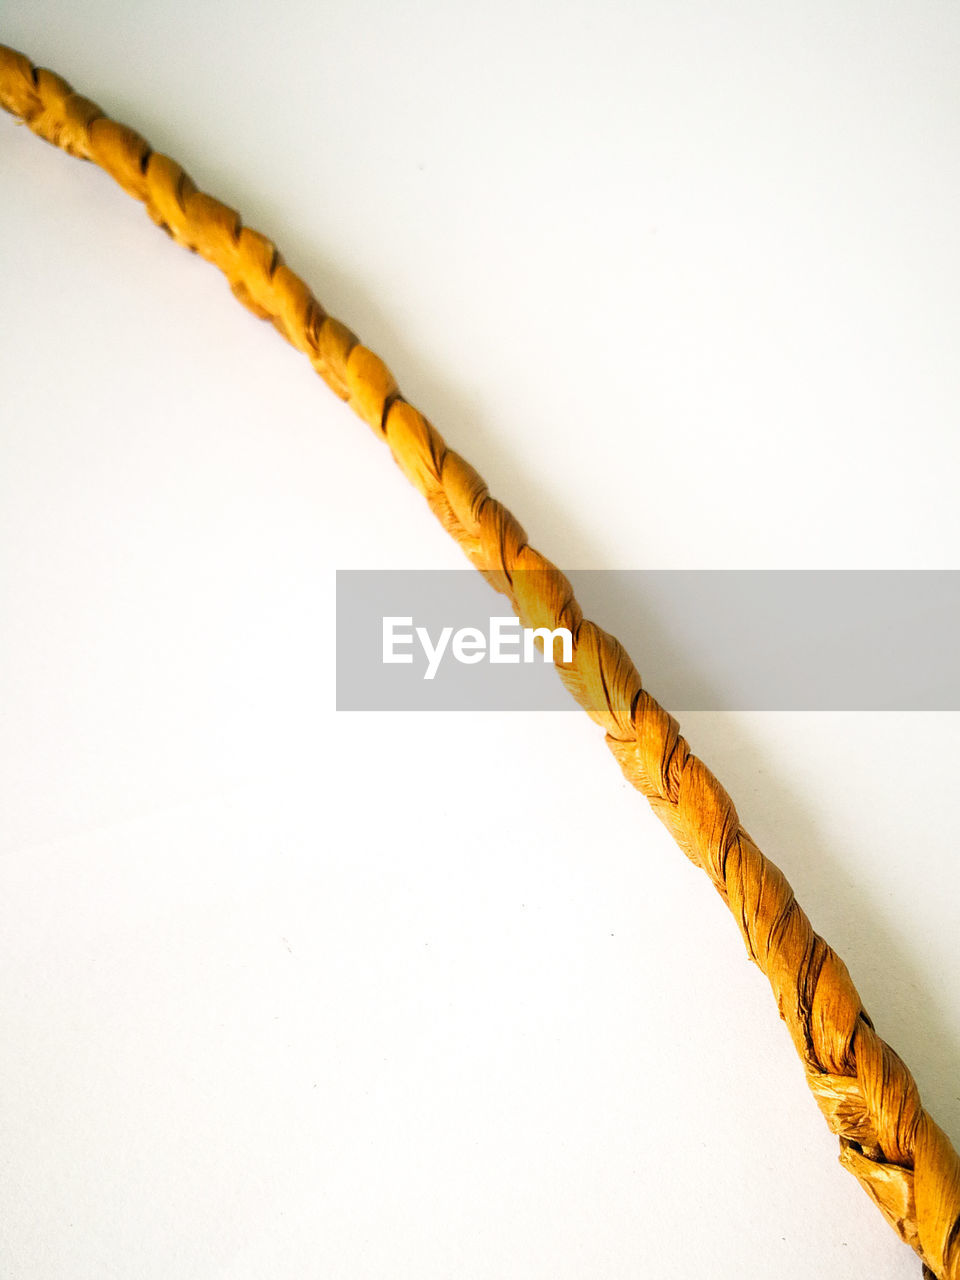 High angle view of yellow rope on white background